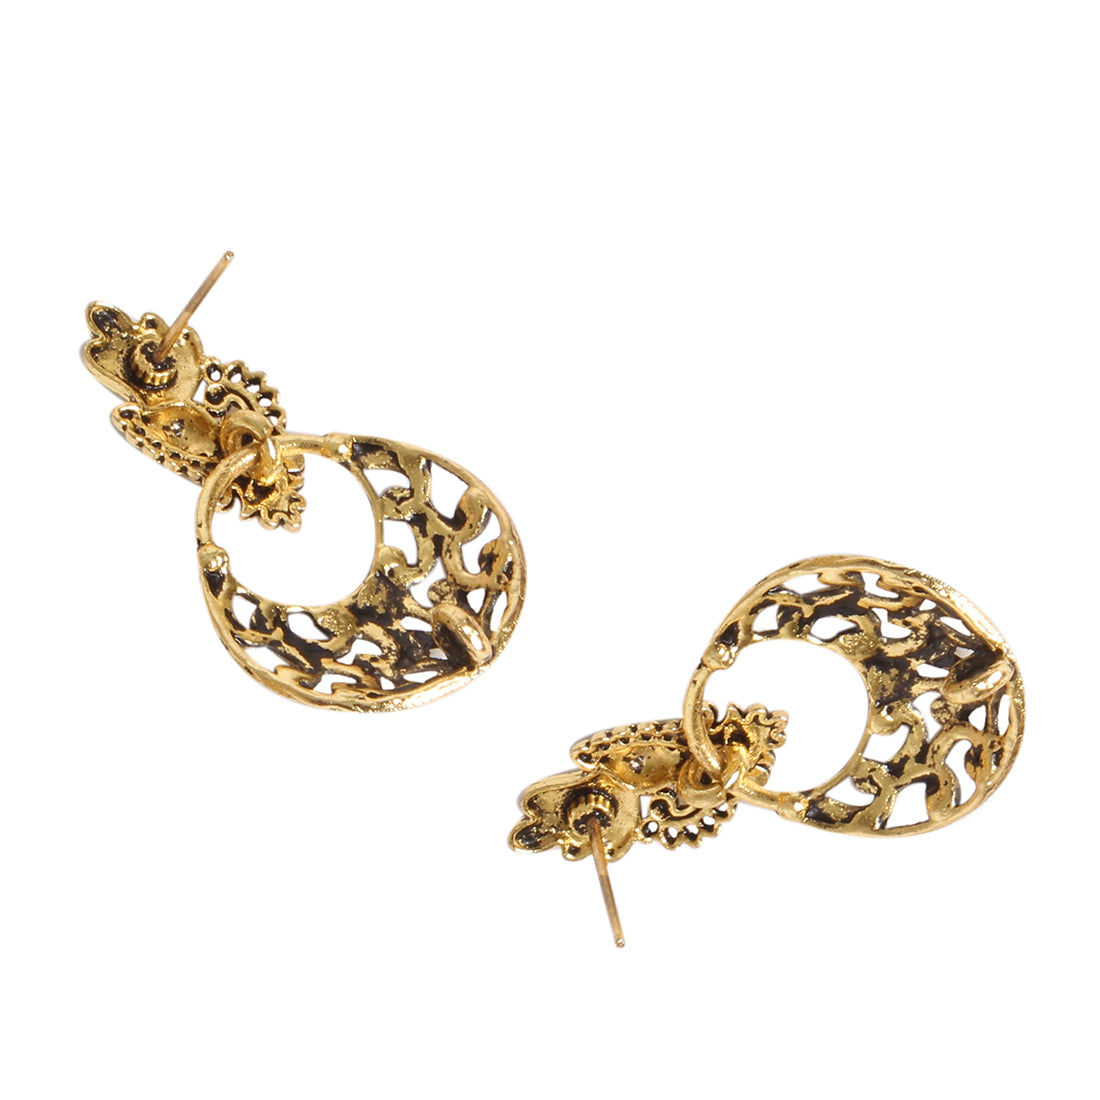 ETHNIC GOLD-TONED OXIDIZED PEACOCK DROP EARRINGS